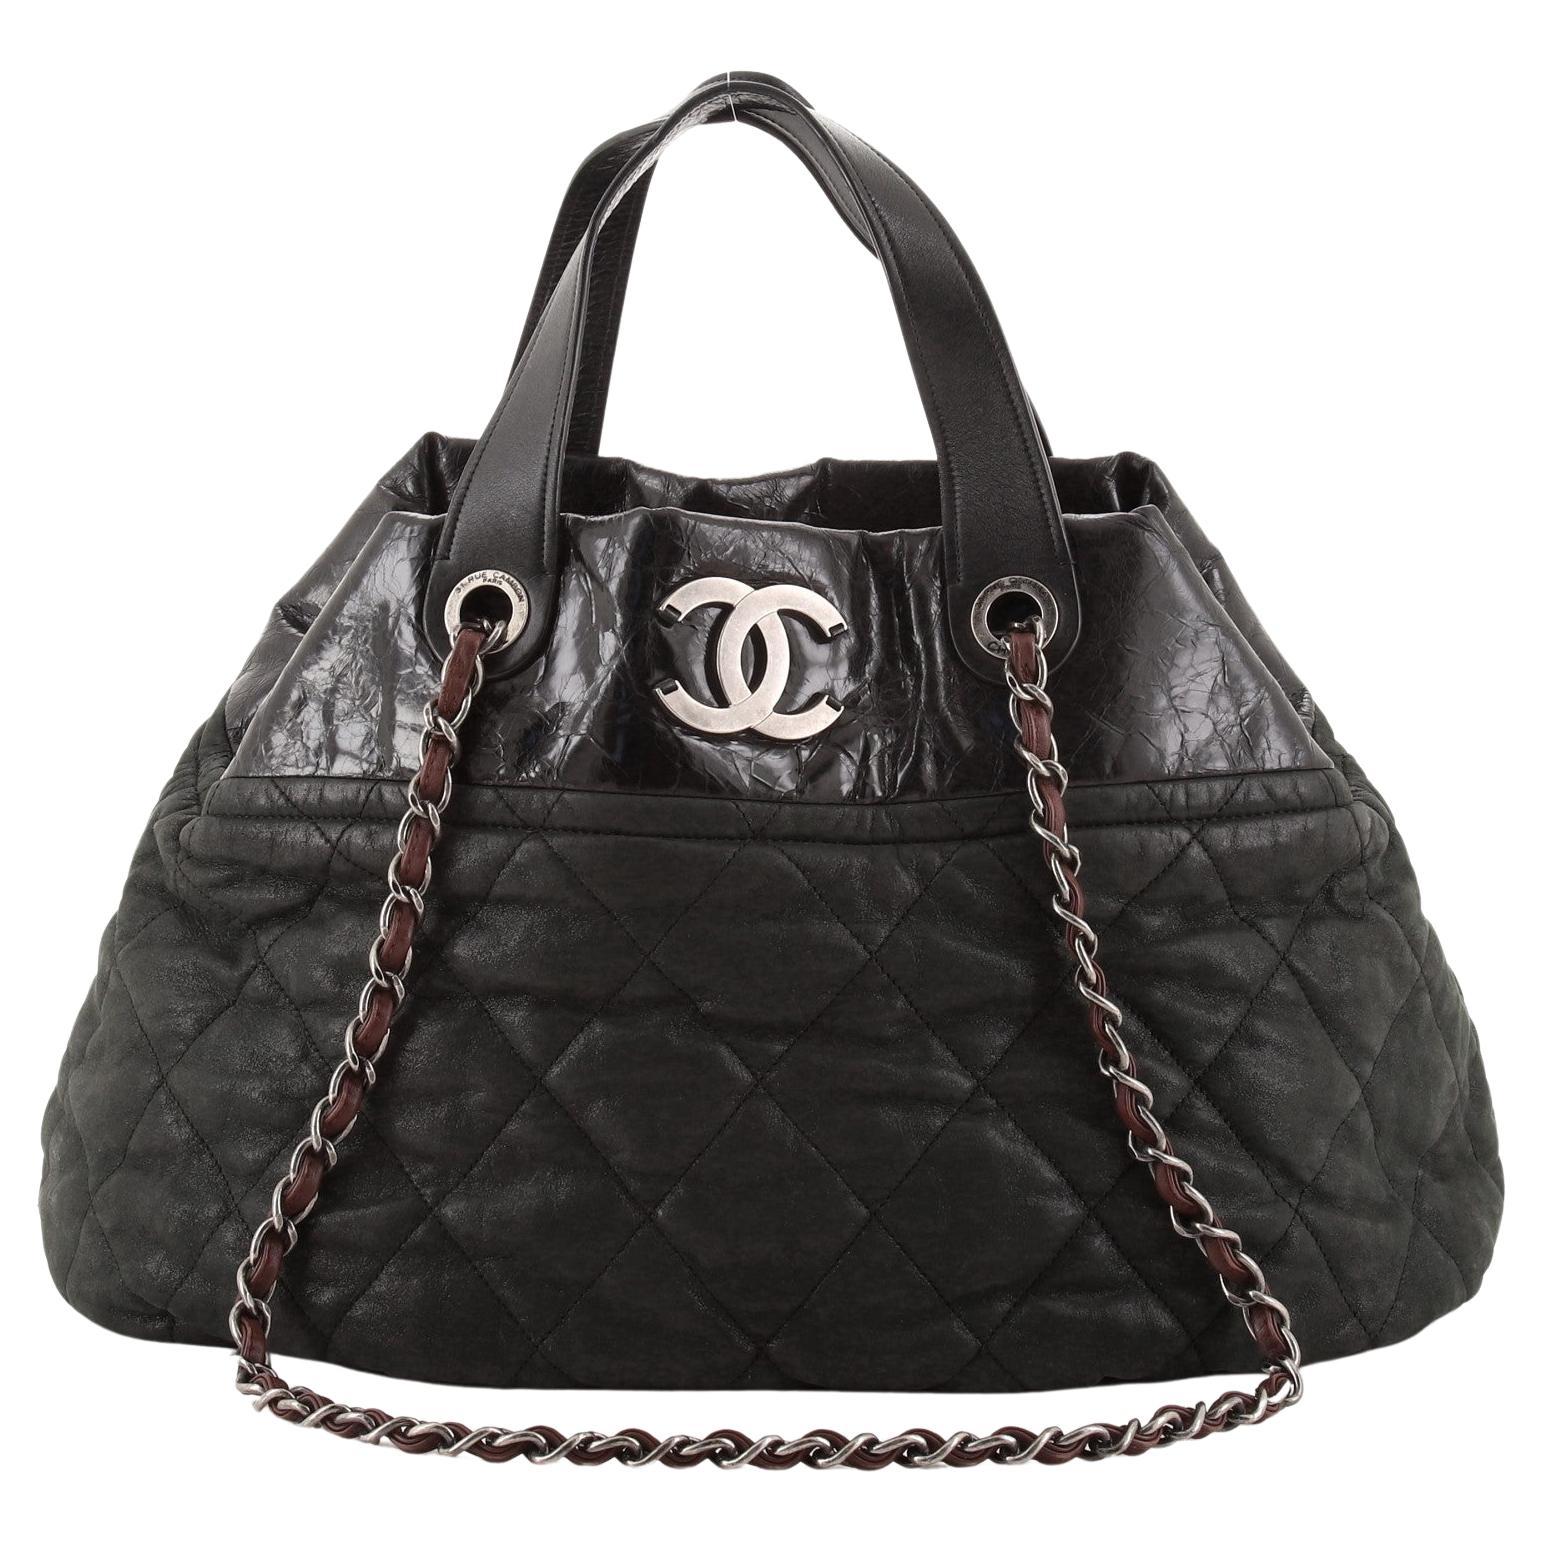 Chanel Vanity Bag Black Gold Bicolore A01619 Leather Lambskin No